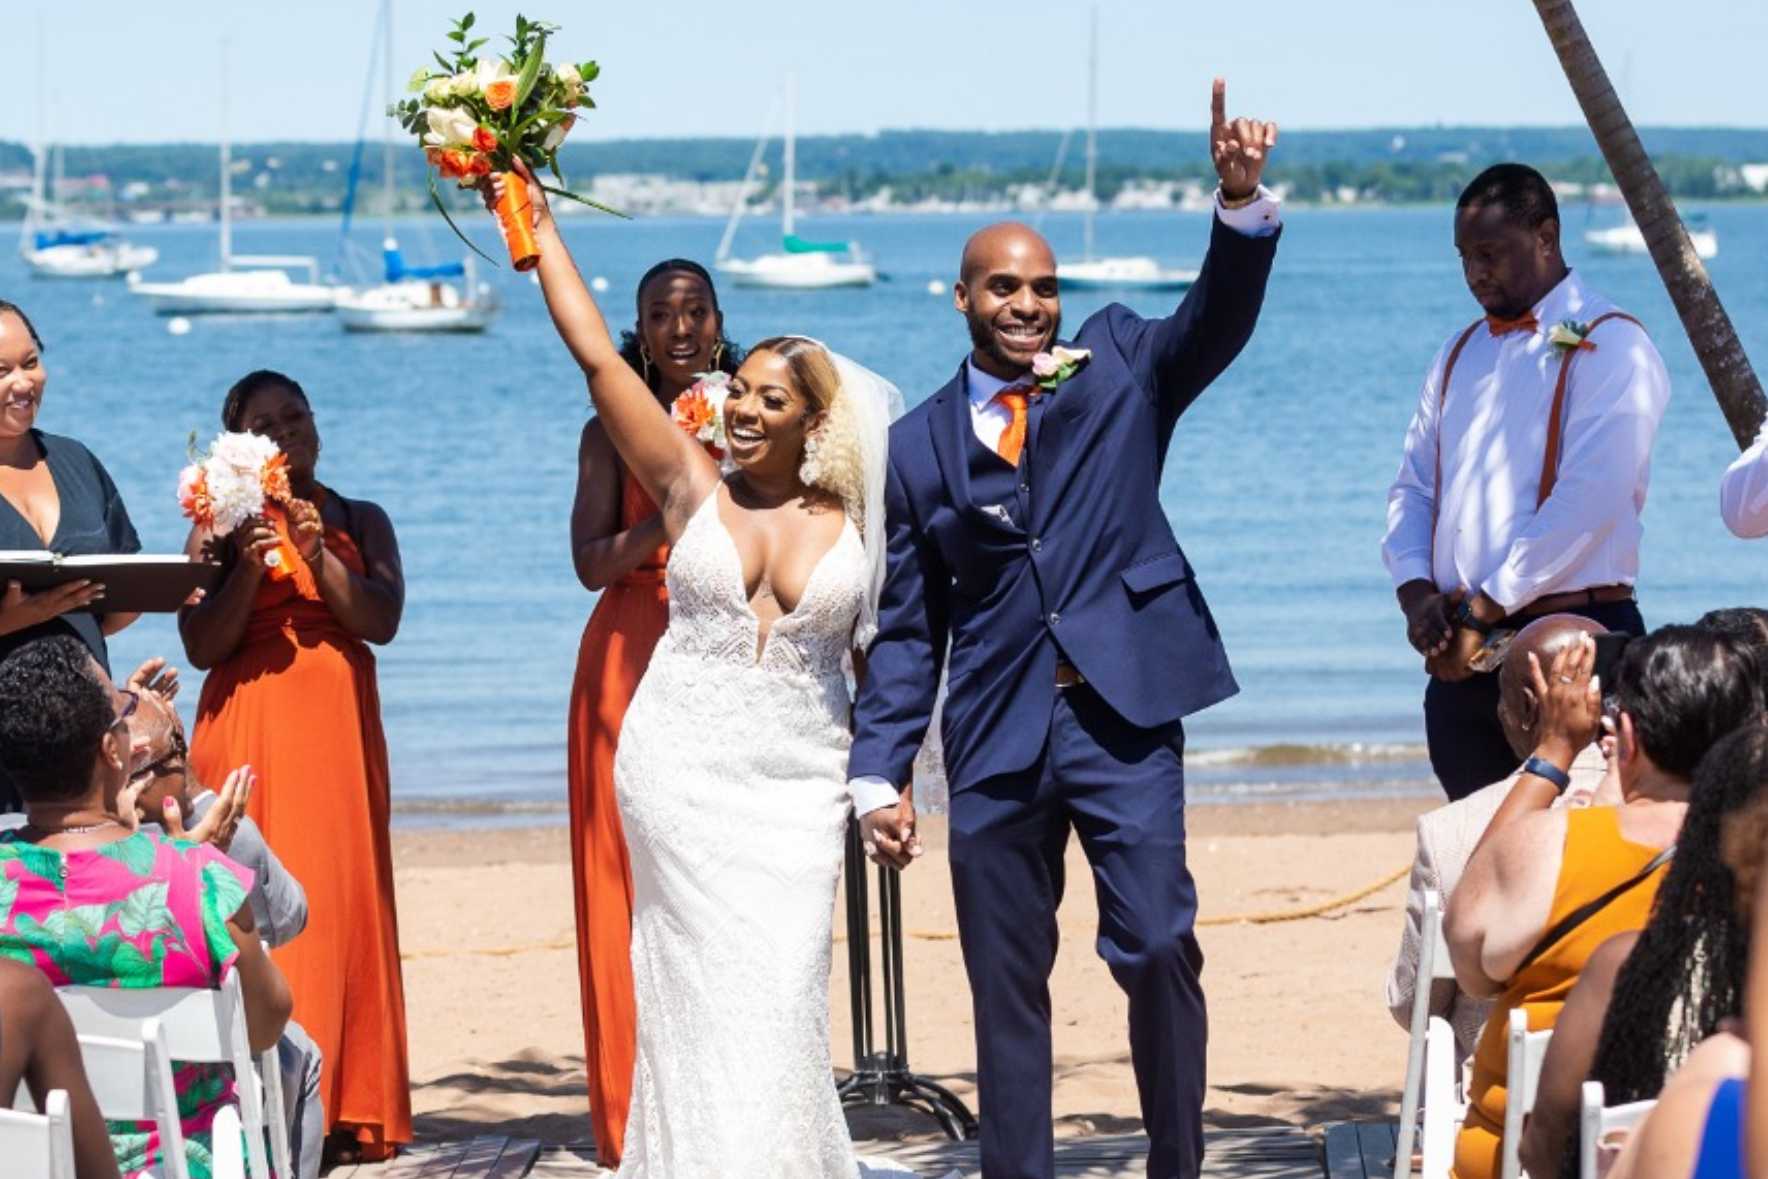 A married couple posing on the beach and people clapping.